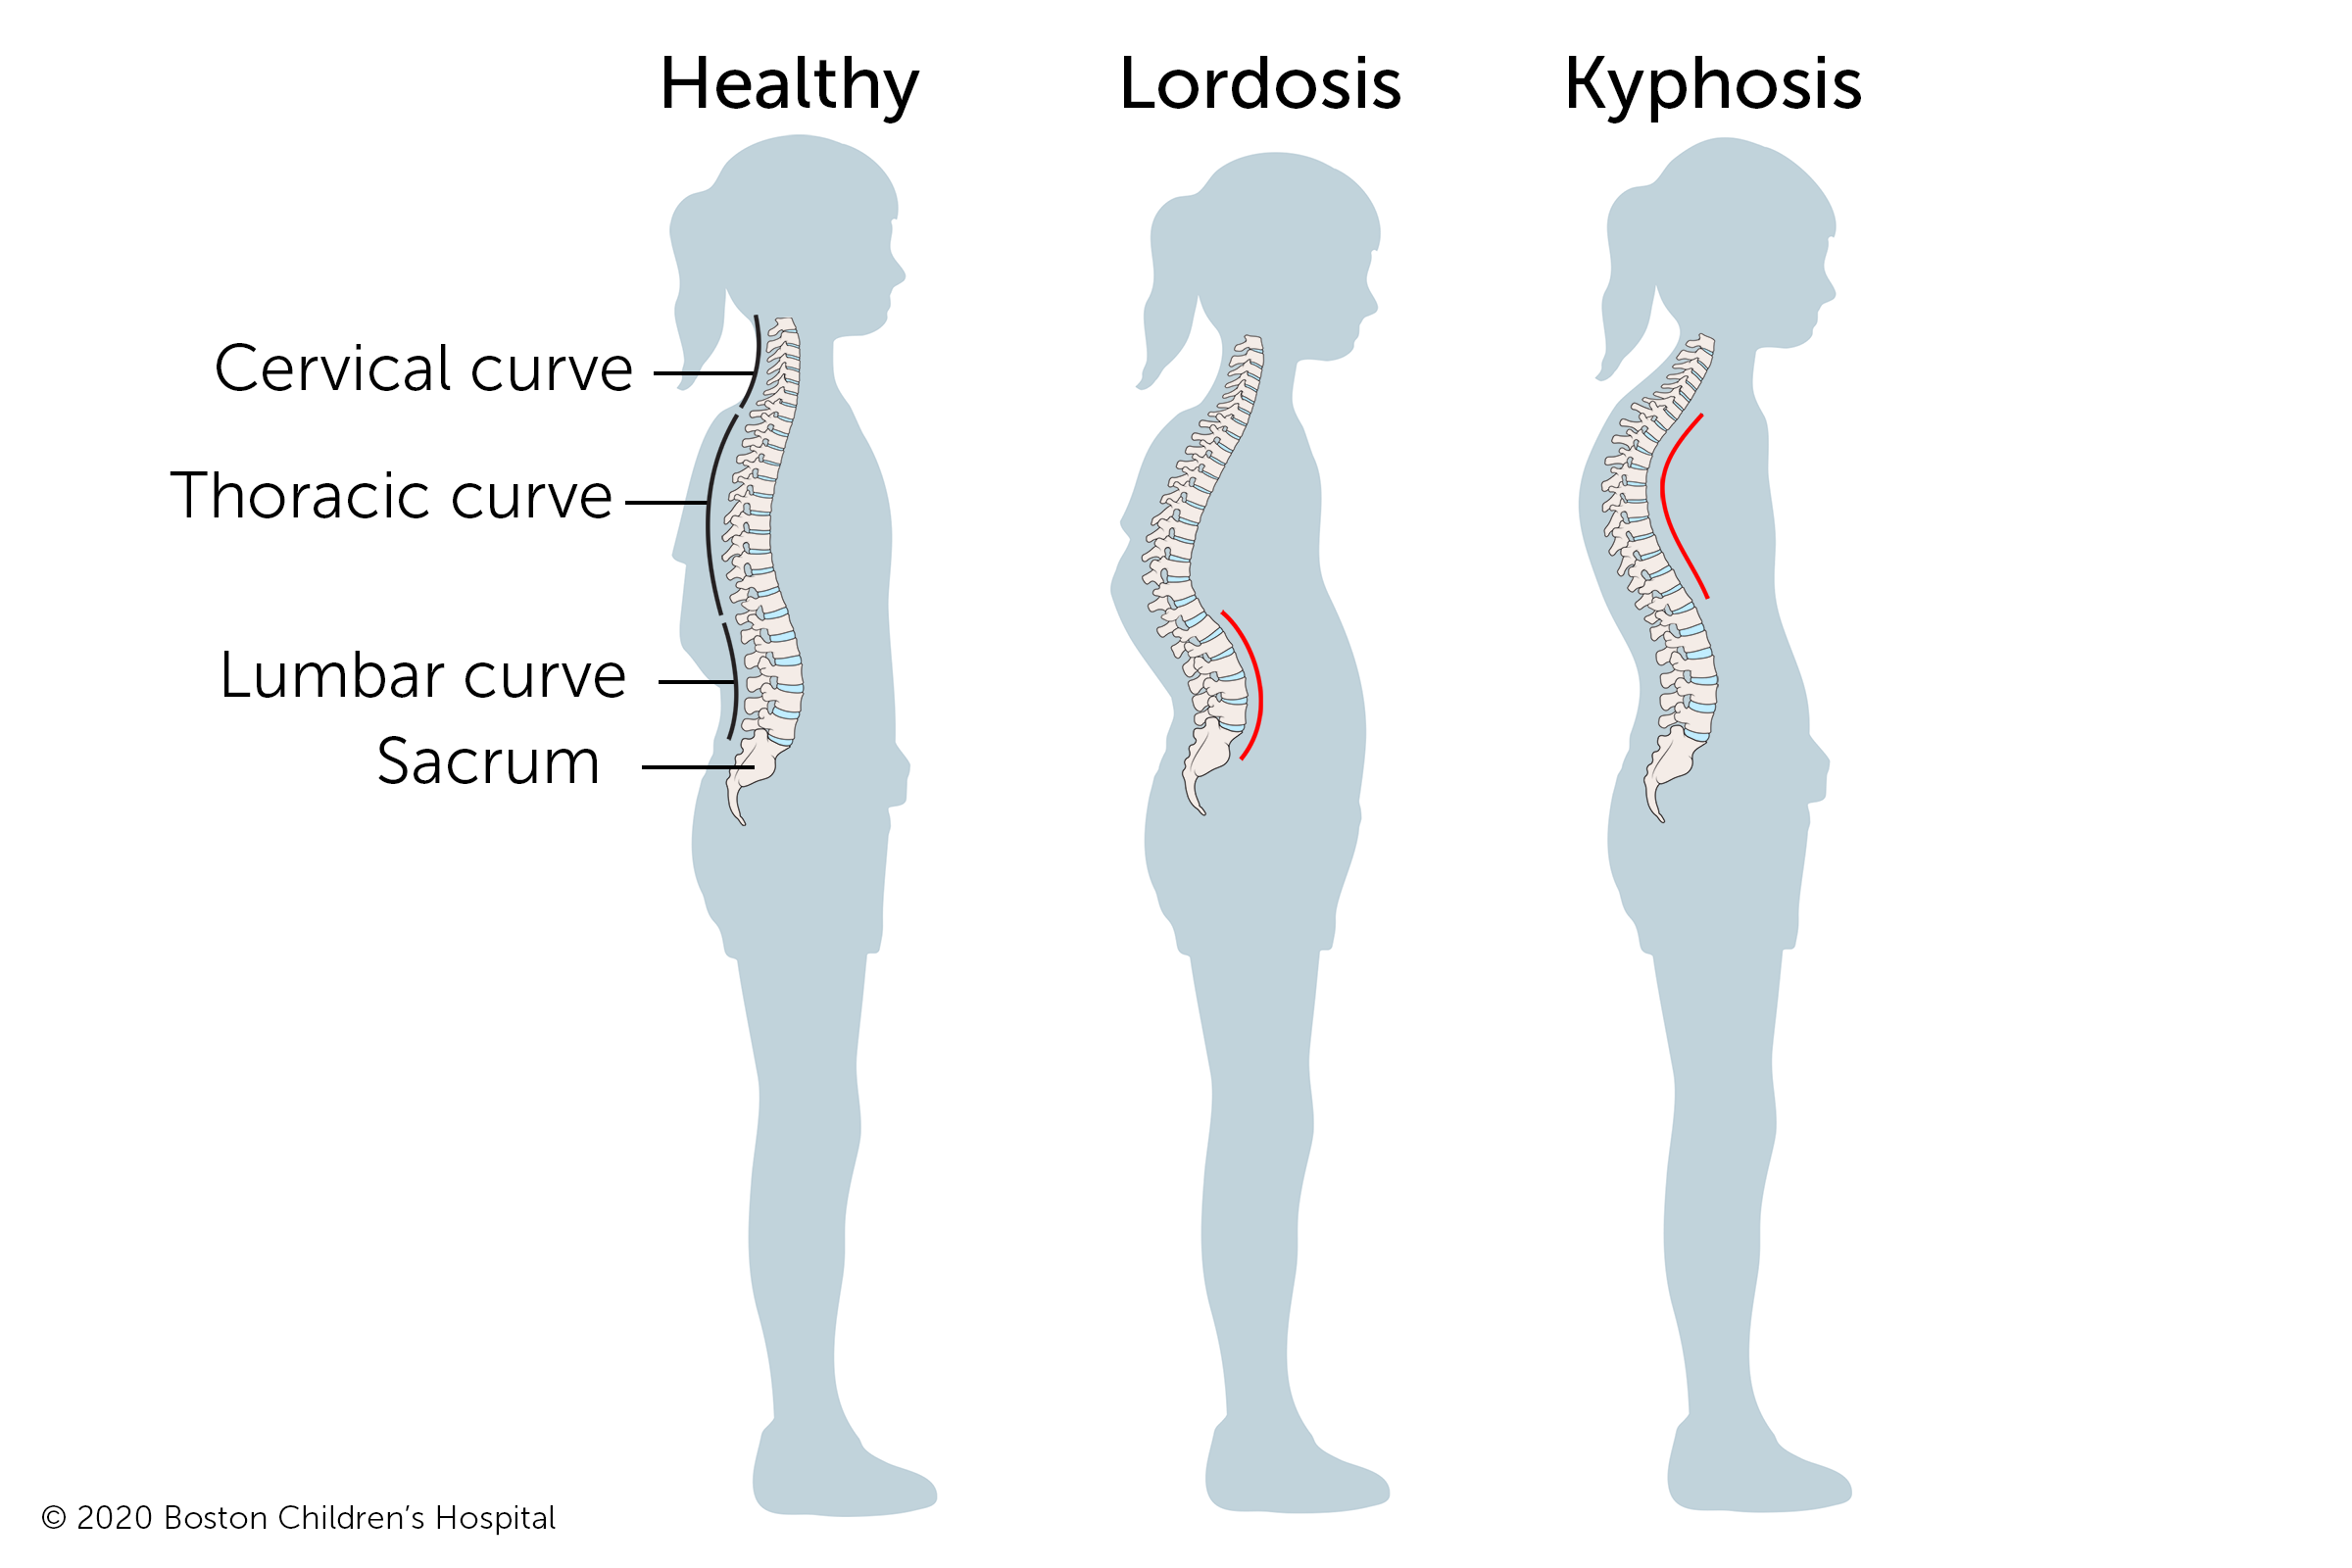 With kyphosis, the spine curves too far back, creating a hunchback appearance. With Lordosis, the spine curves too far forward. 